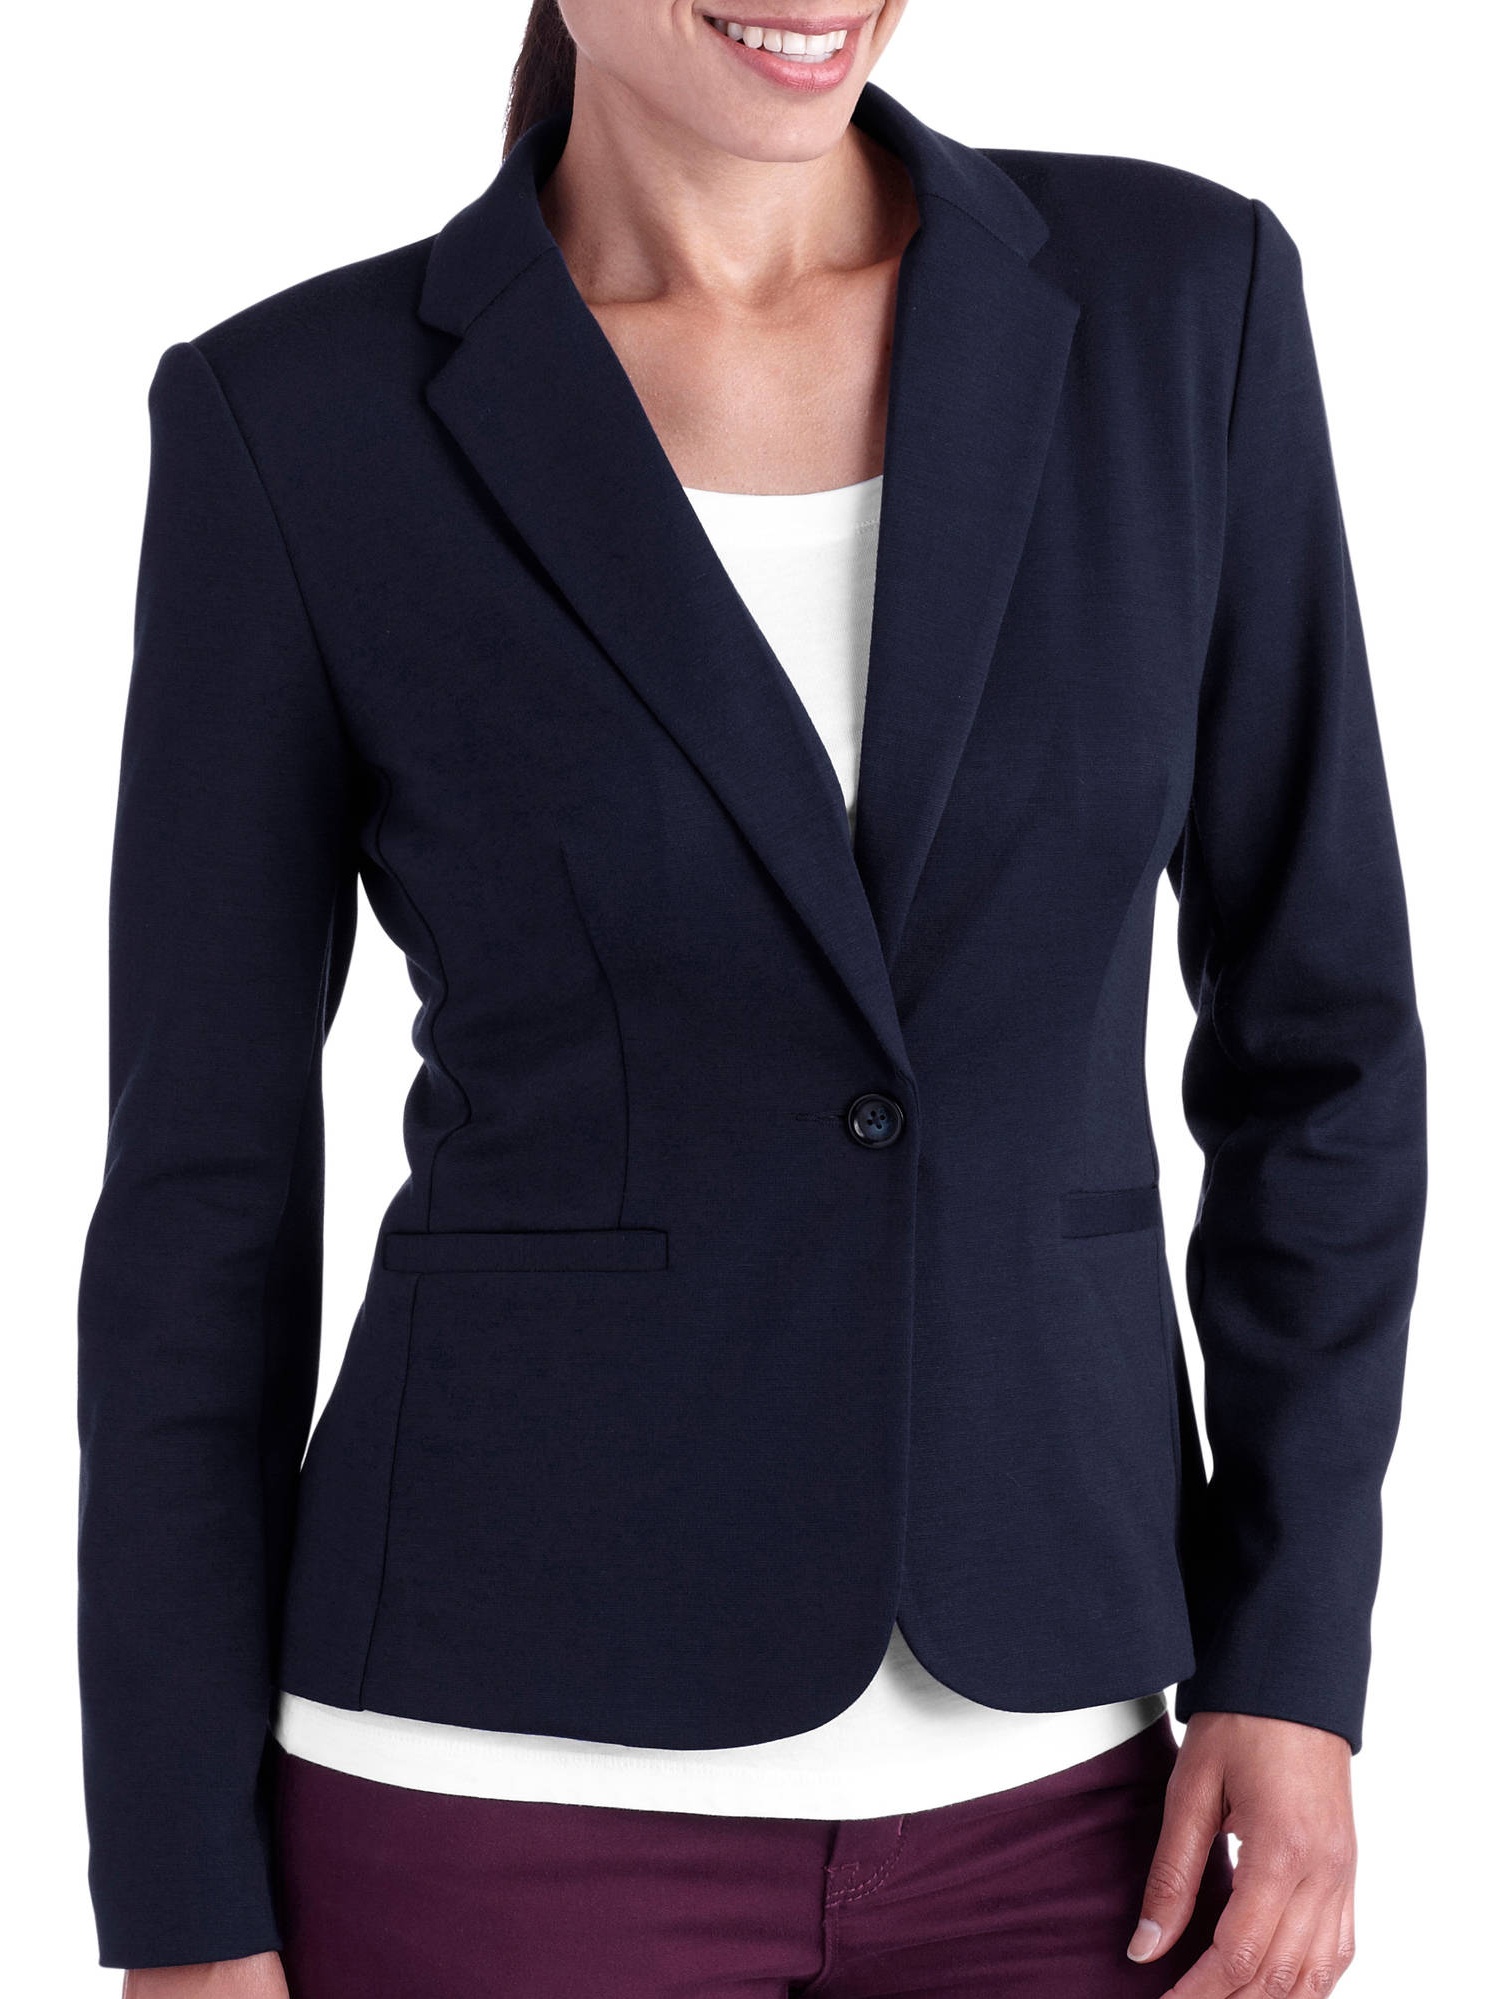 Women's Ponte Suiting Jacket - image 1 of 2